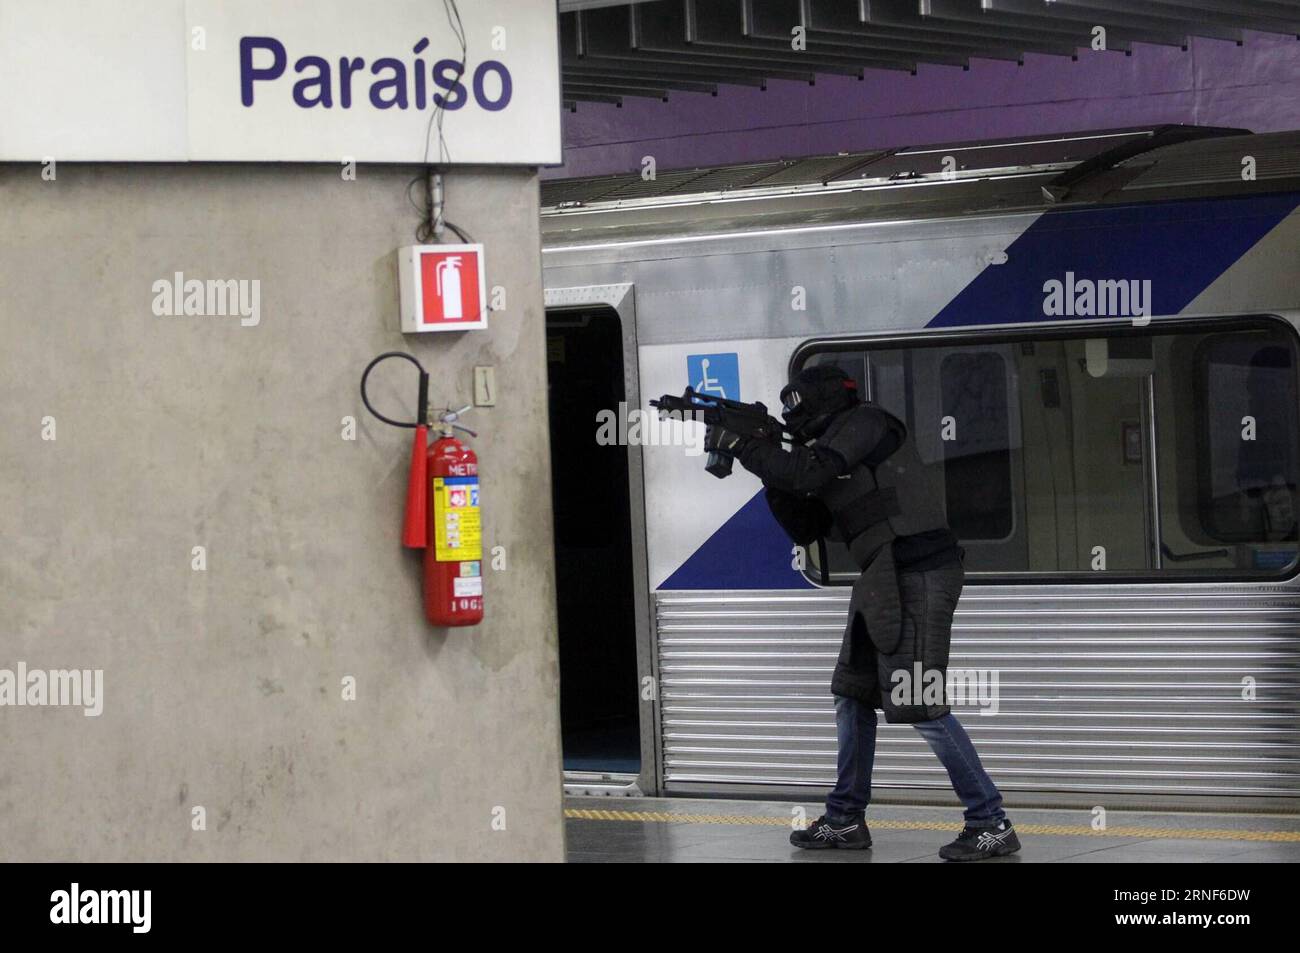 SAO PAULO, July 20, 2016 -- Members of security forces takes part in an anti-terrorism attack drill in Paraiso Metro Station, in Sao Paulo, Brazil, on July 20, 2016. The drillers will remain in the city until the end of the Rio de Janeiro 2016 Olympic Games. /AGENCIA ESTADO) (SP)BRAZIL-SAO PAULO-OLYMPICS-SECURITY WertherxSantana PUBLICATIONxNOTxINxCHN   Sao Paulo July 20 2016 Members of Security Forces Takes Part in to Anti Terrorism Attack Drill in Paraiso Metro Station in Sao Paulo Brazil ON July 20 2016 The Drillers will Remain in The City Until The End of The Rio de Janeiro 2016 Olympic Ga Stock Photo